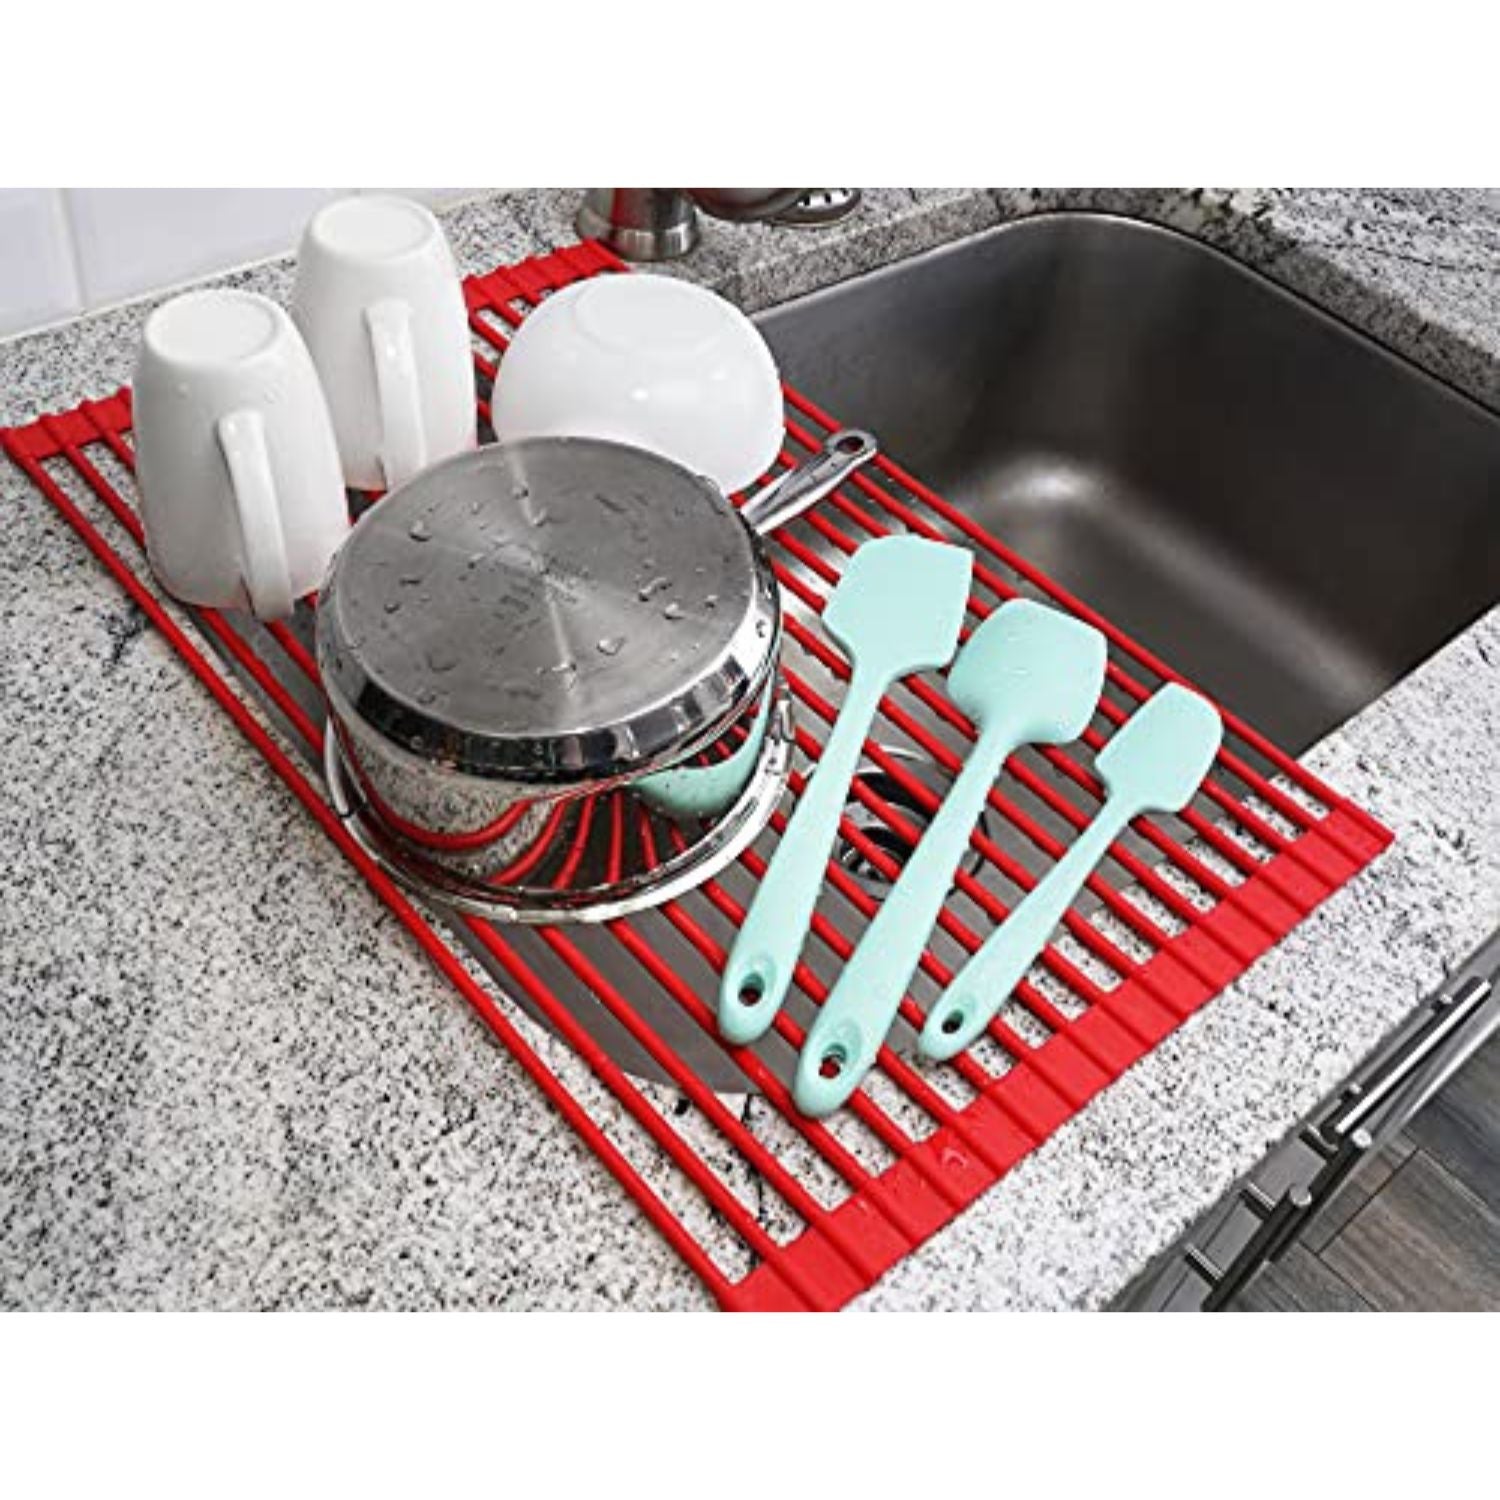 Buy Multipurpose Roll-Up Dish Drying Rack - Red